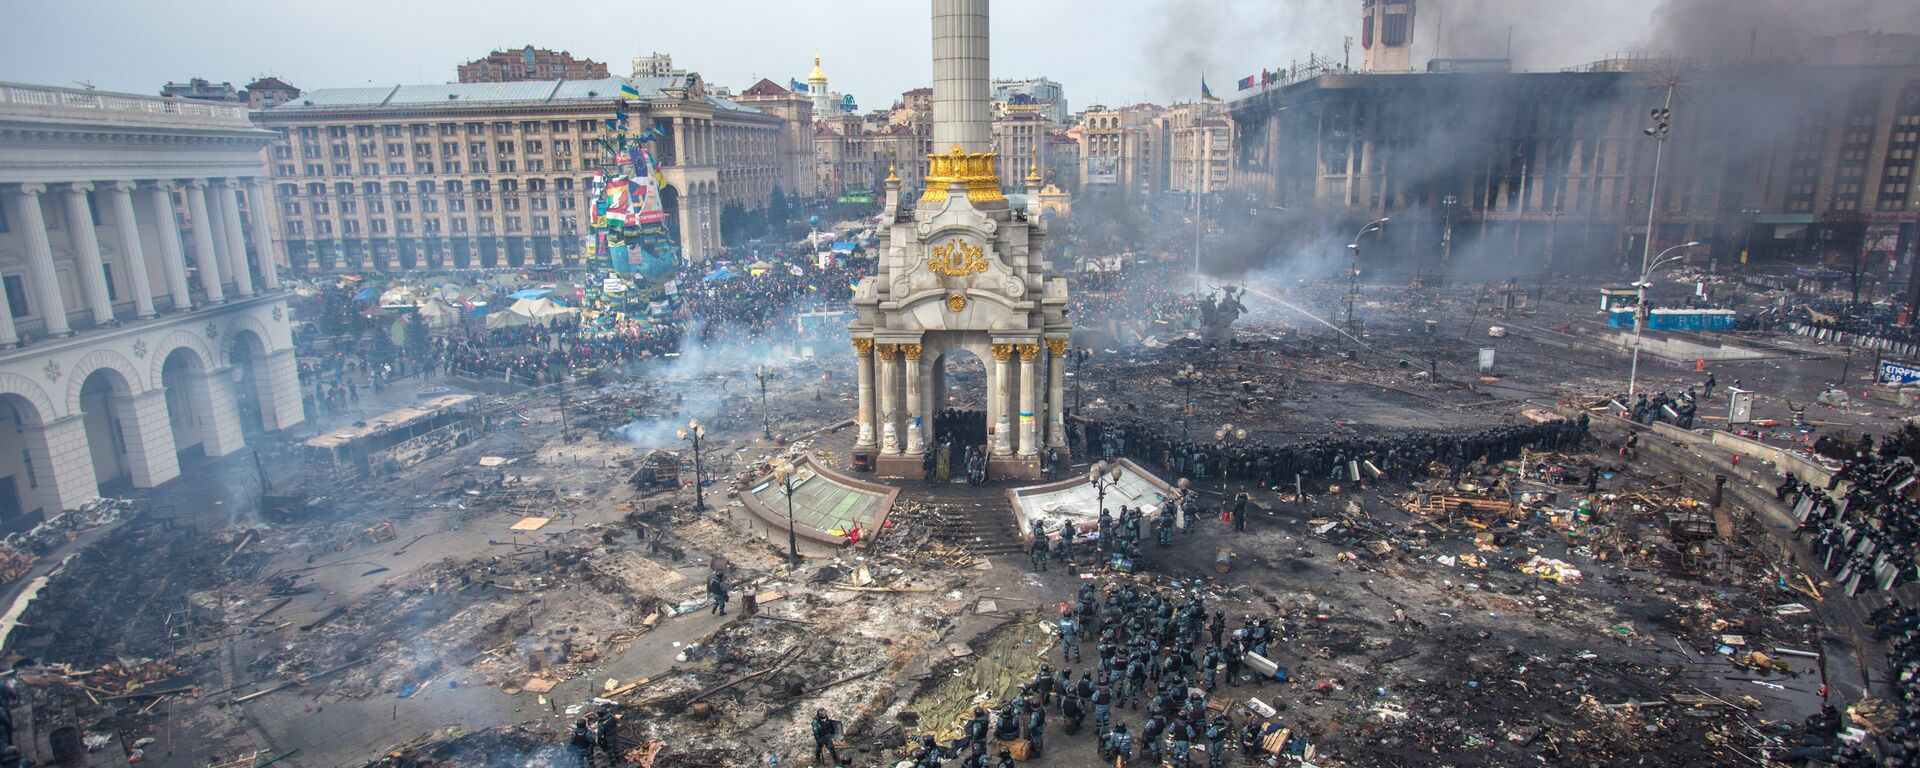 Police officers and opposition supporters are seen on Maidan Nezalezhnosti square in Kiev, where clashes began between protesters and the police. (File) - Sputnik International, 1920, 08.03.2022